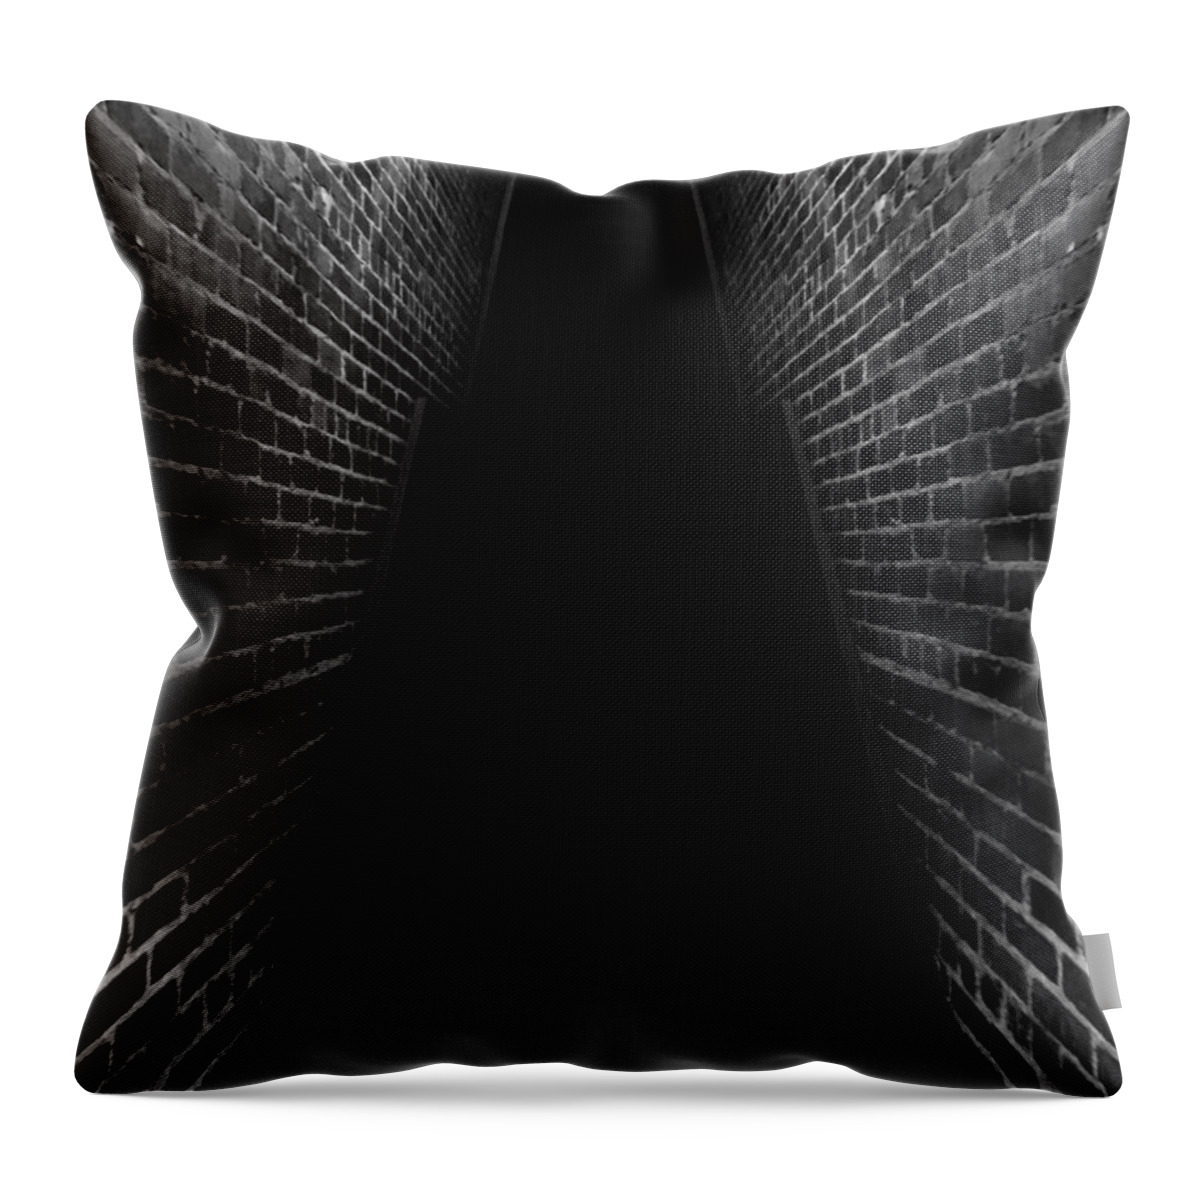  Throw Pillow featuring the New Upload #4 by Jenny Revitz Soper